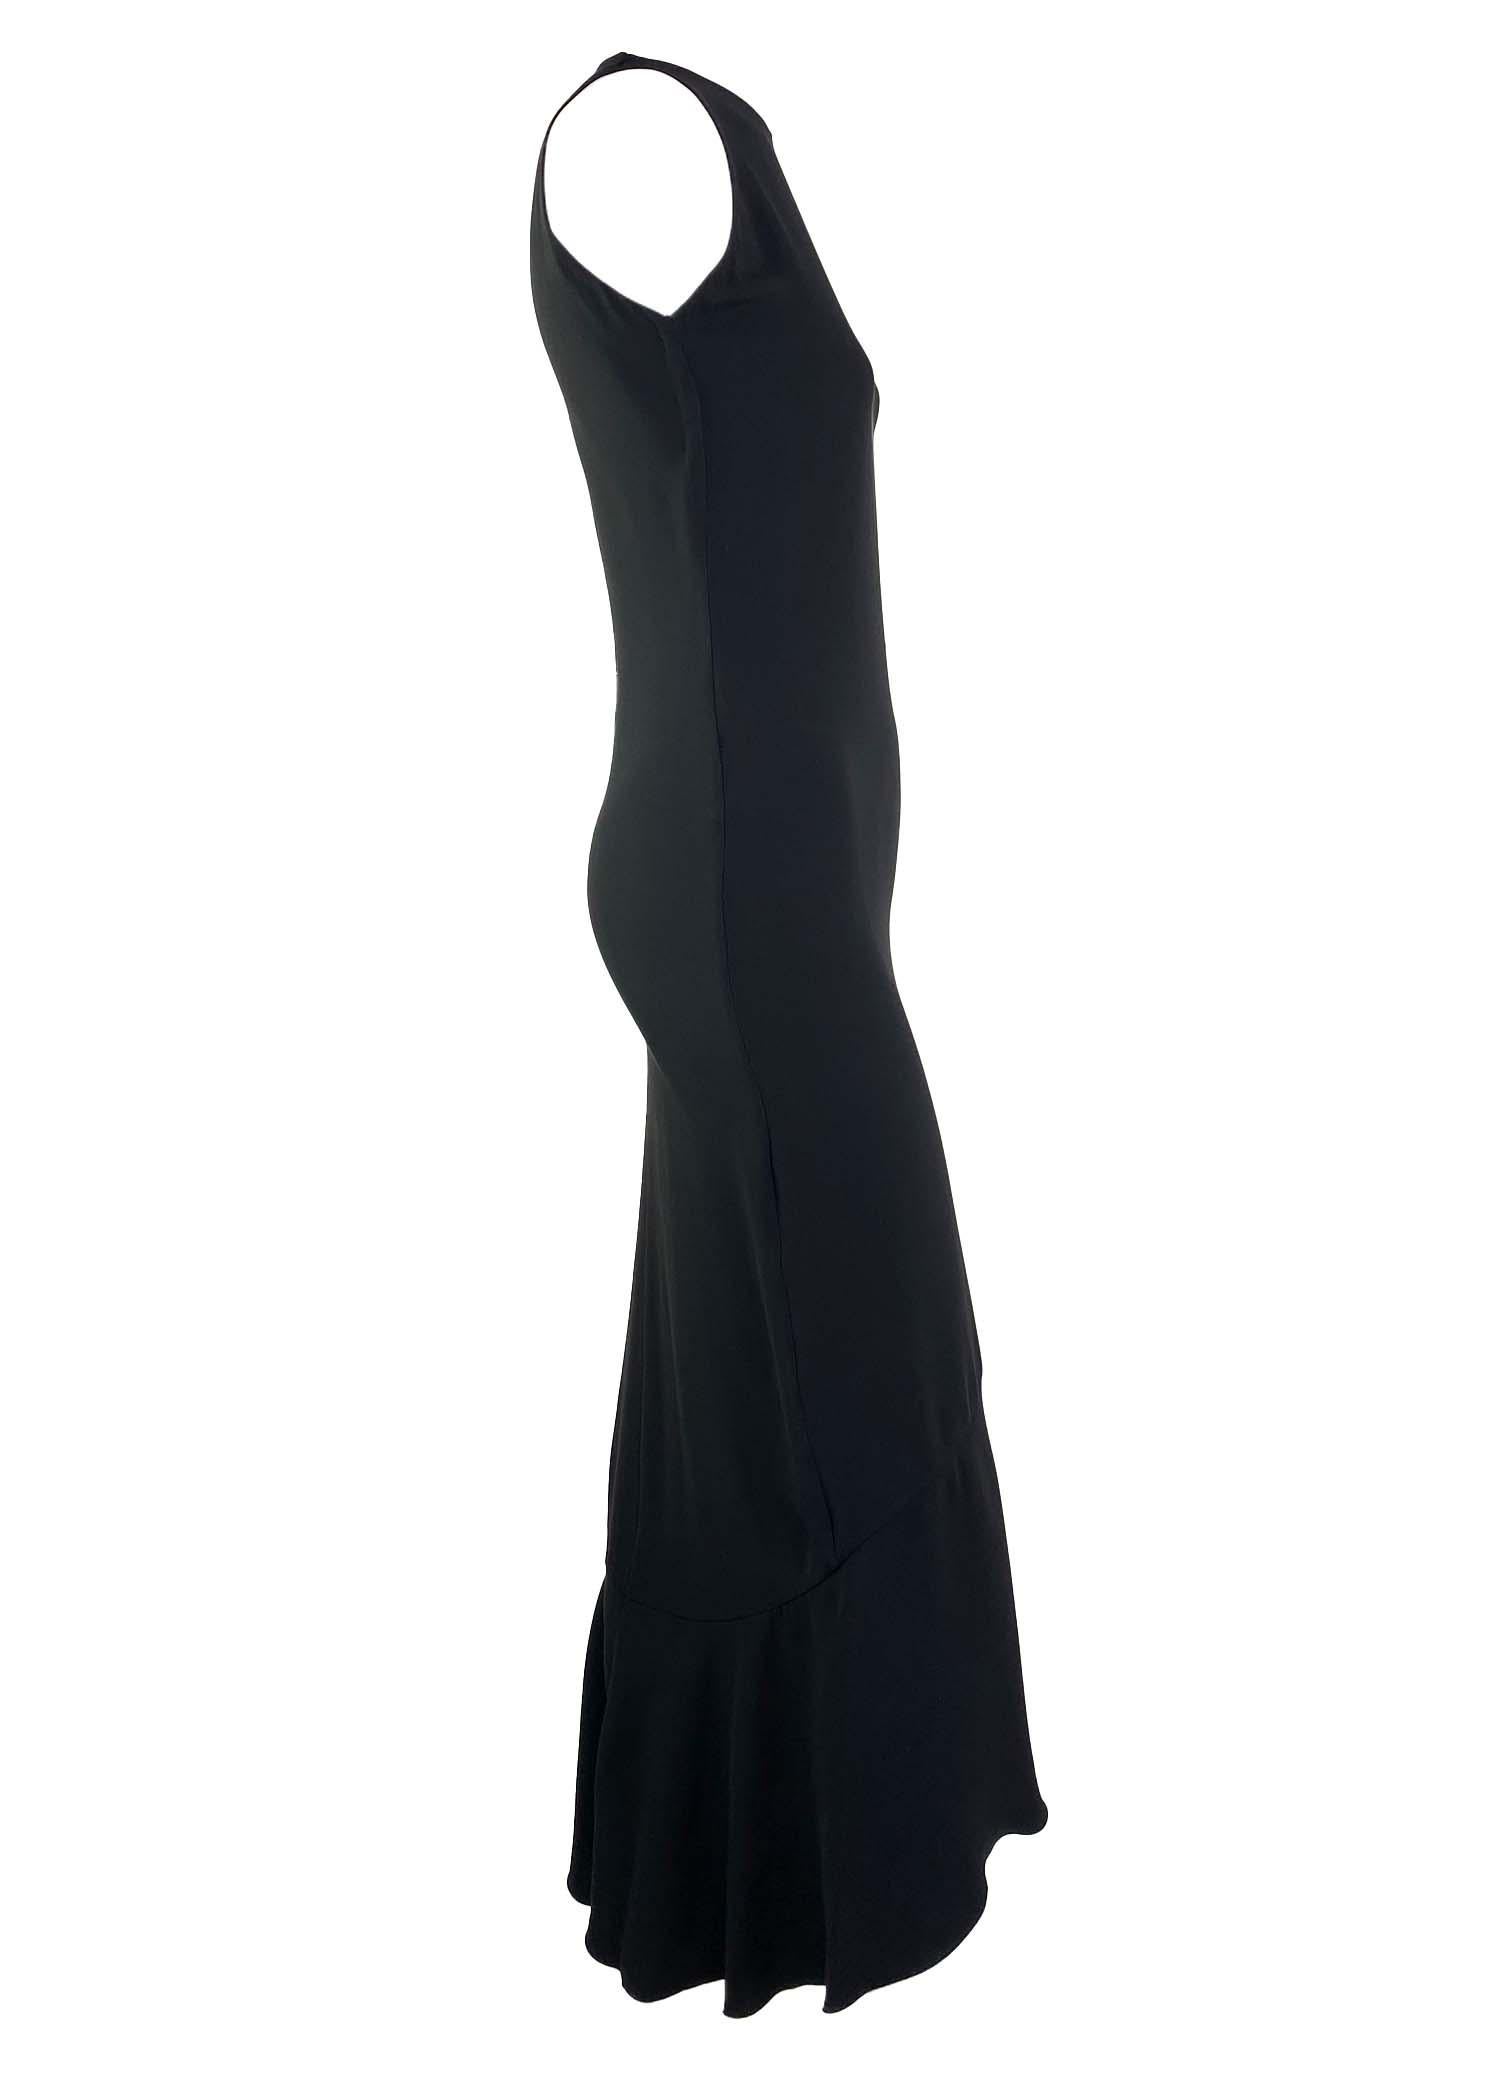 Mid-Late 1990s Gianni Versace Couture Black Dropped Hem Bias-Cut Wiggle Gown LBD In Excellent Condition For Sale In West Hollywood, CA